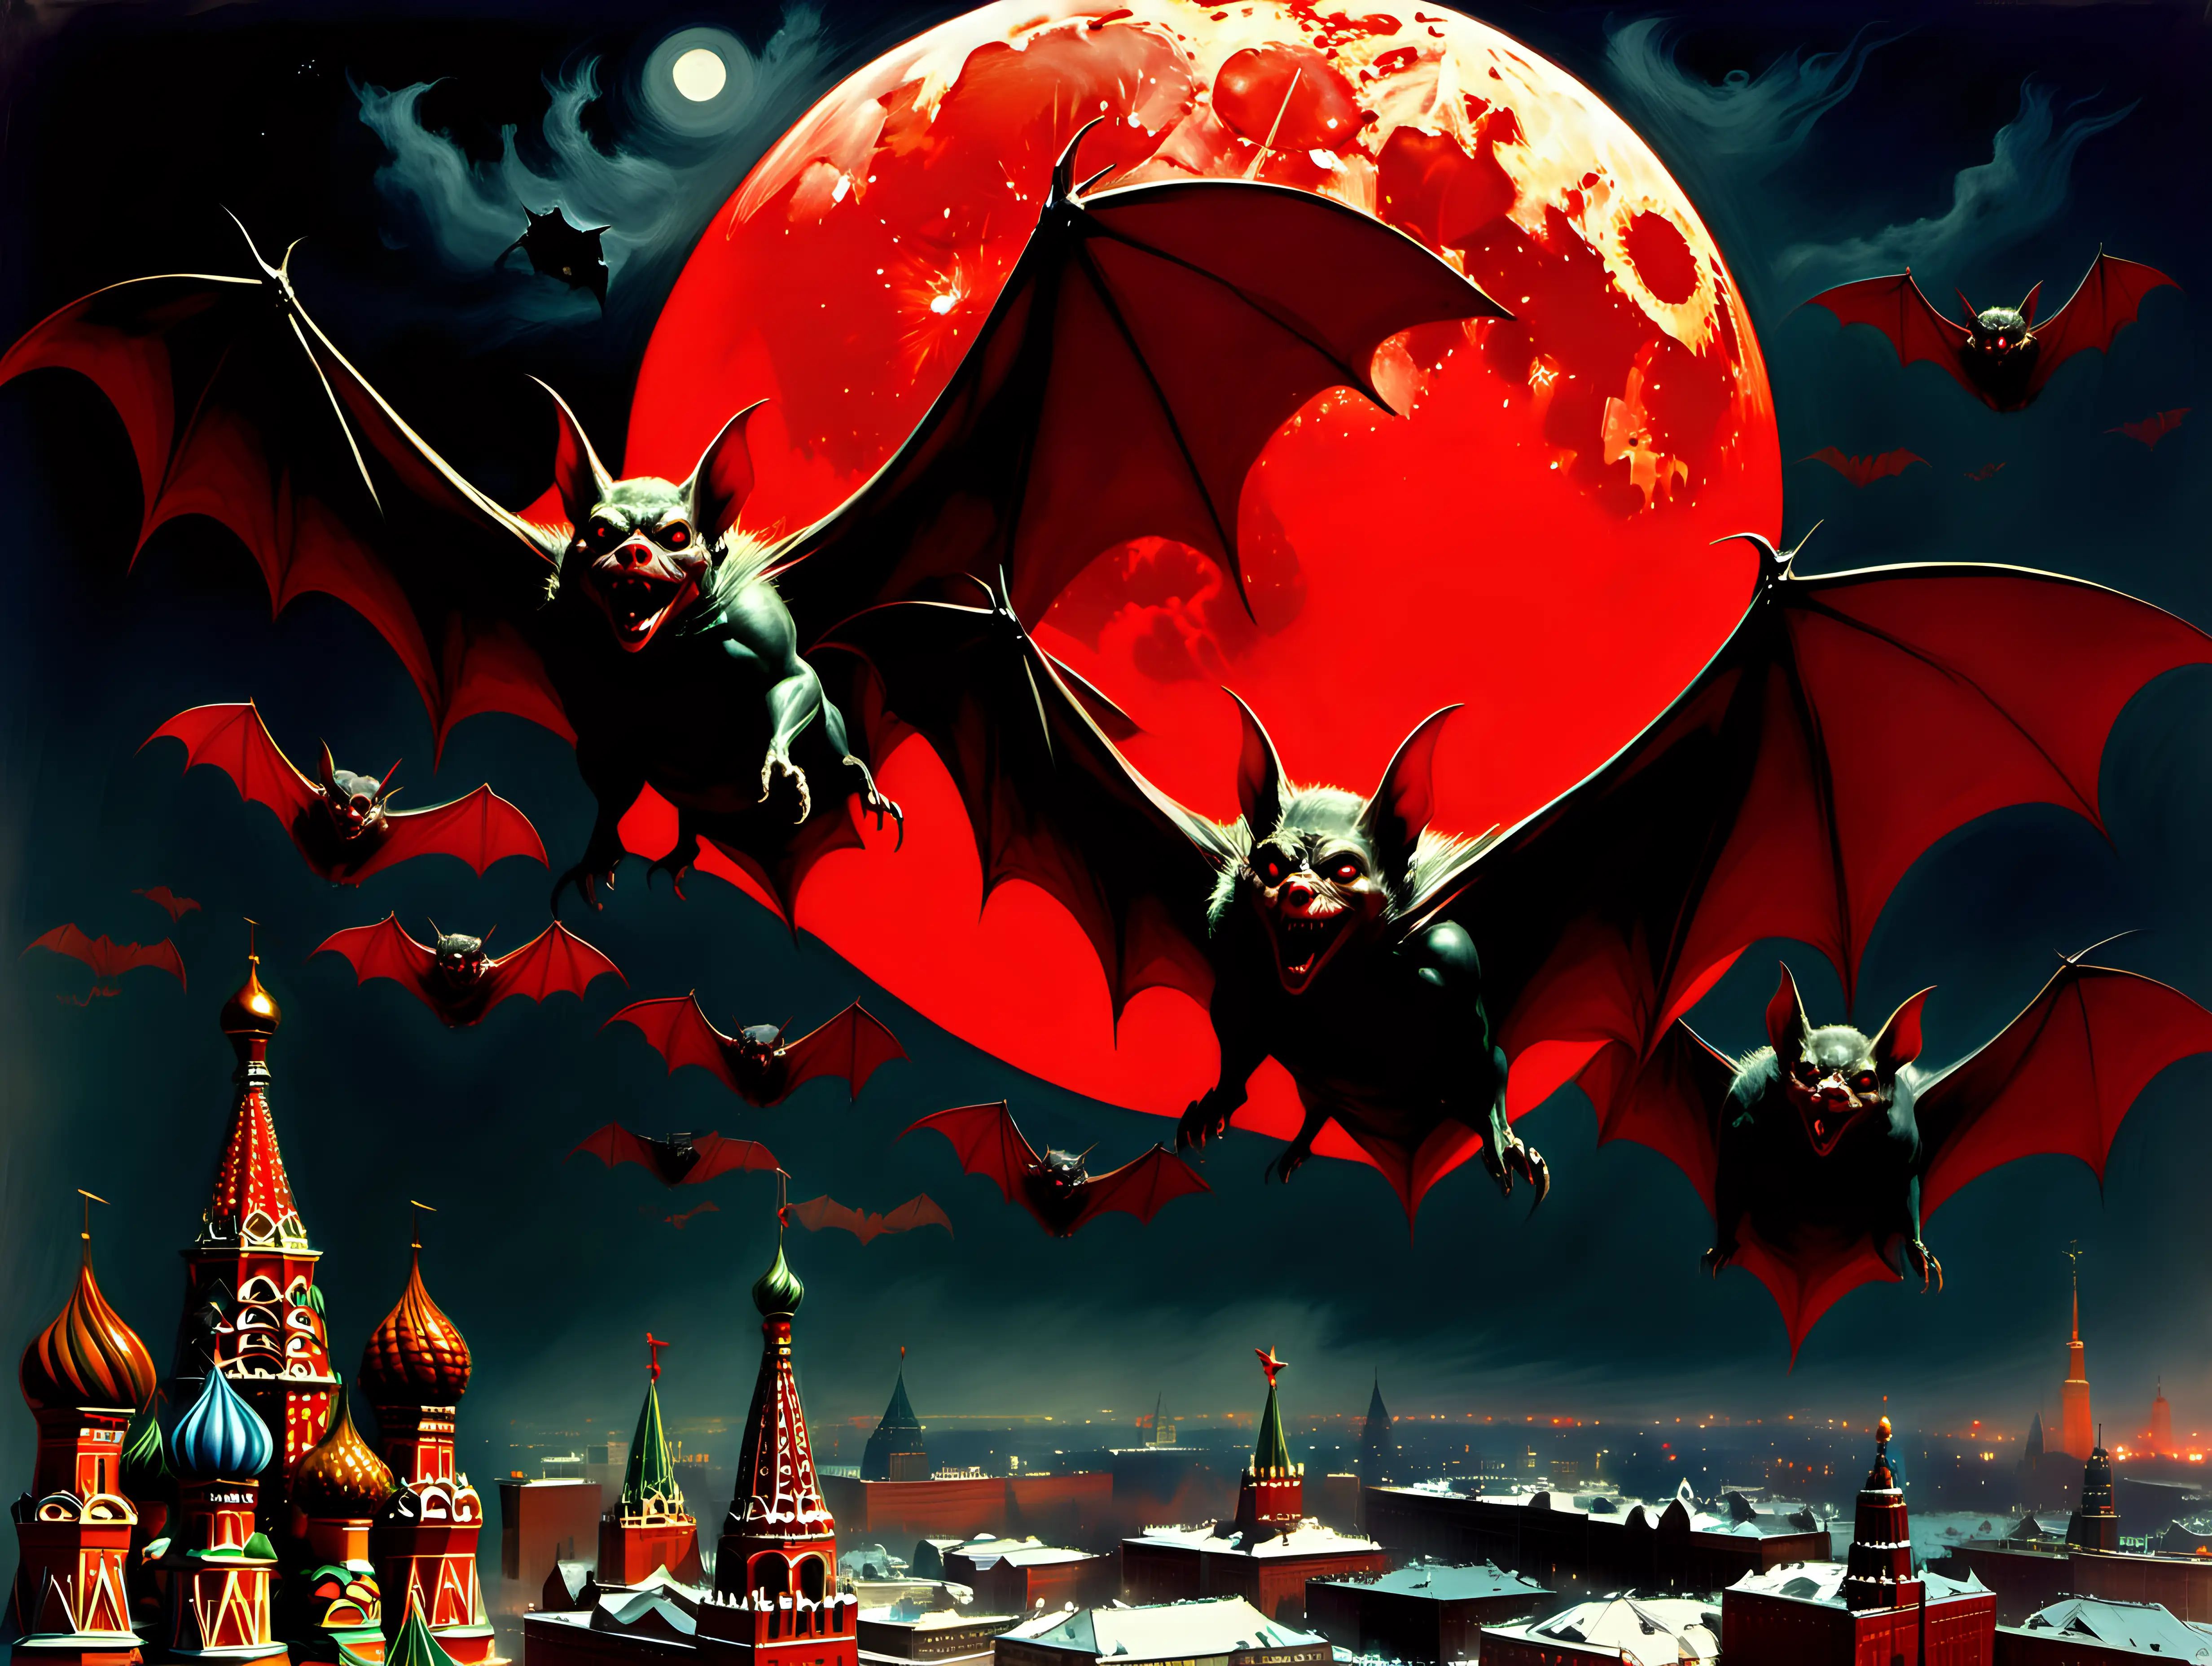 Vampire bats flying over Moscow 1940 at night huge red moon
Frank Frazetta style